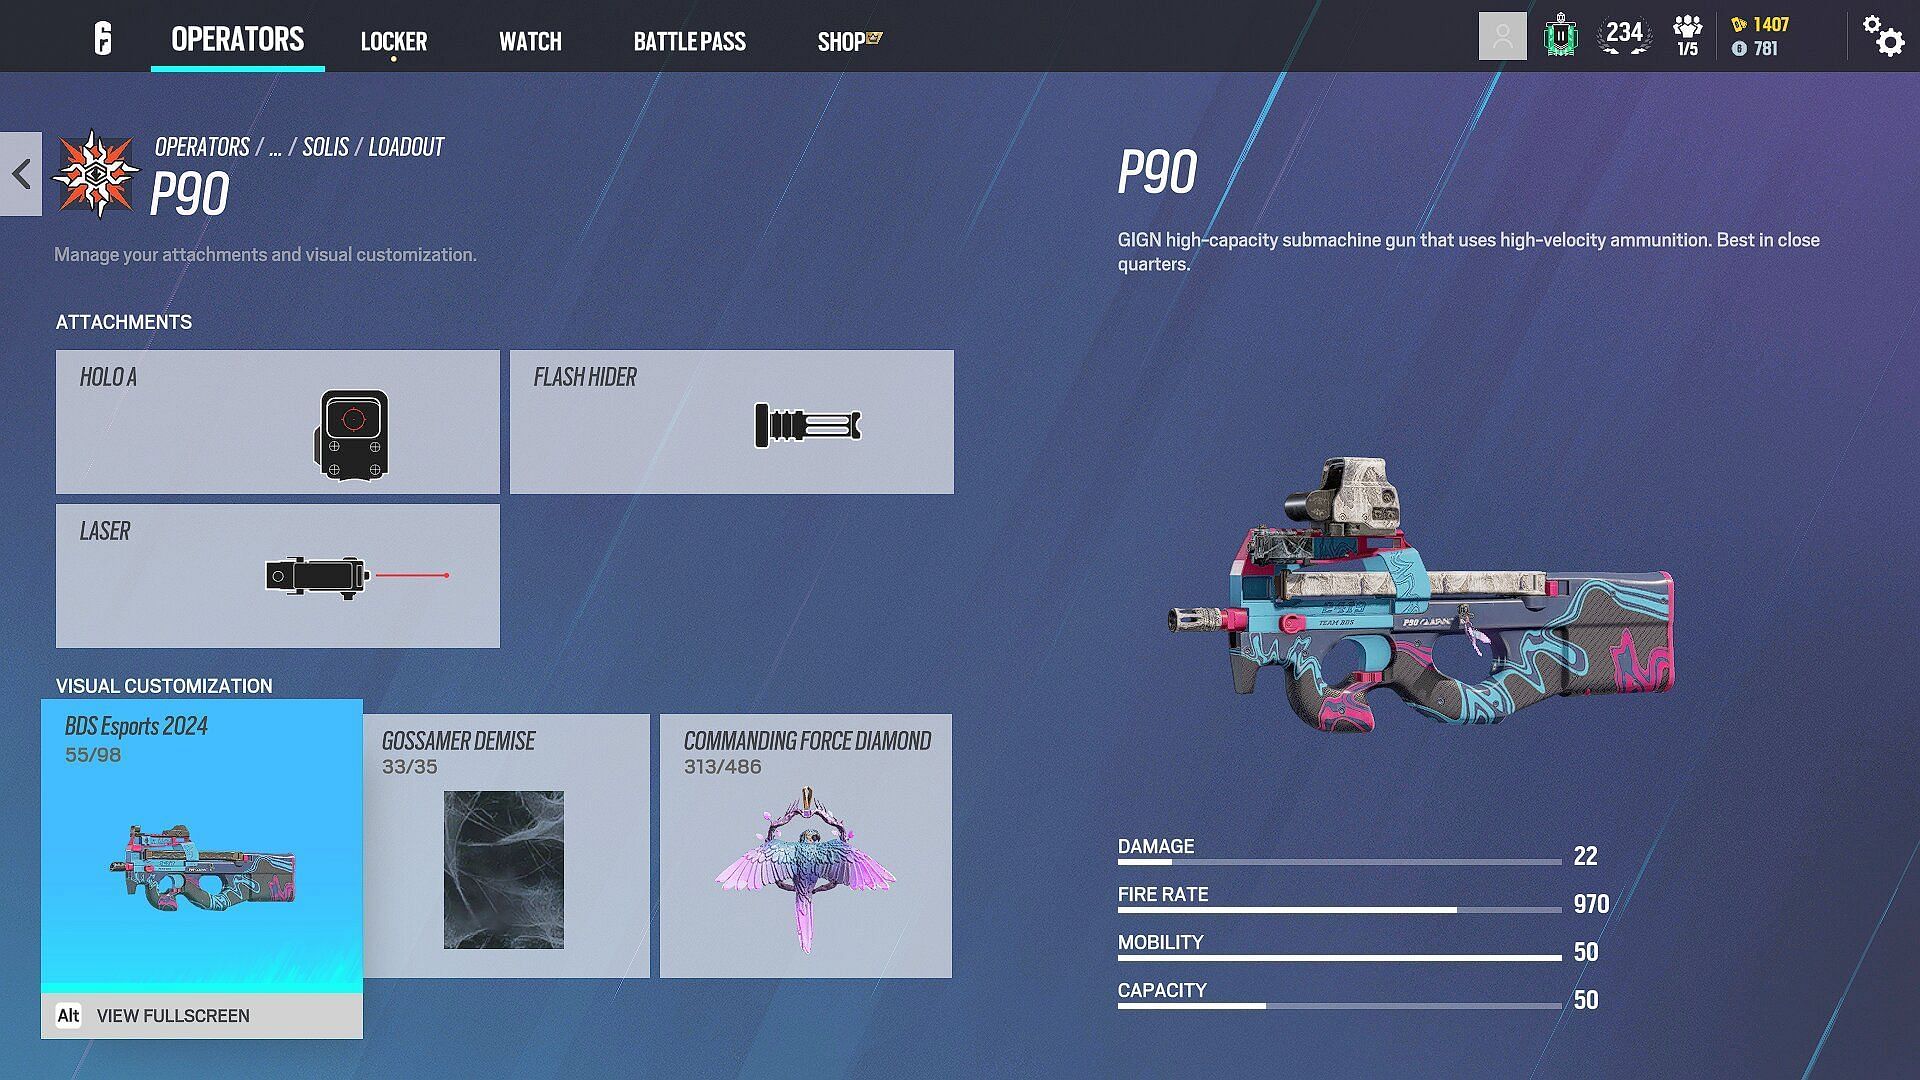 Primary SMG for Solis&#039; loadout, the P90 (Image via Ubisoft)